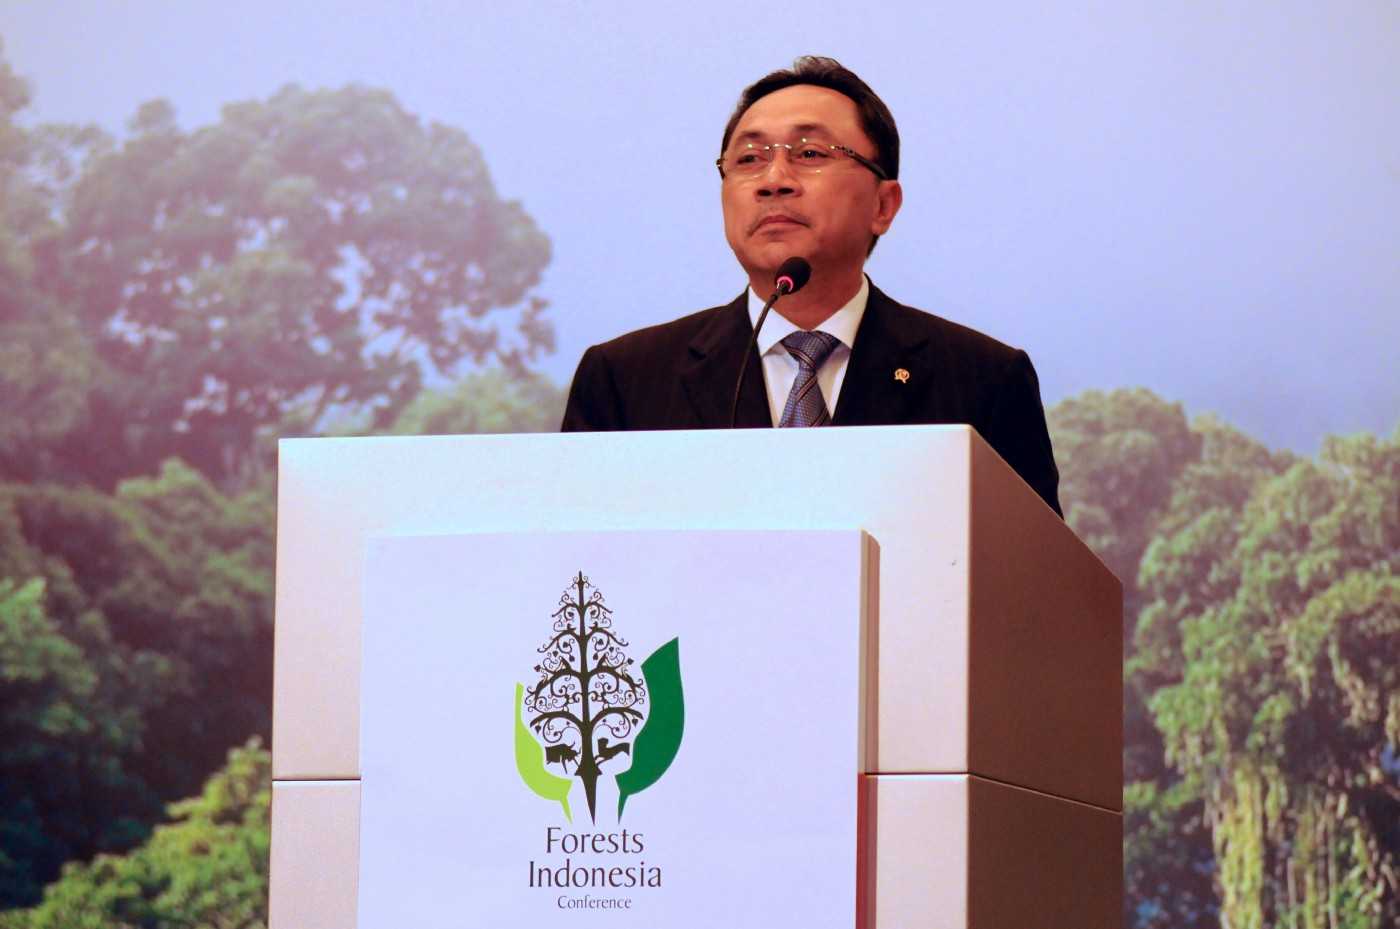 Forestry Minister Zulkifli Hasan speaking at the closing plenary of the Forests Indonesia Conference in 2011. By Aulia Erlangga/CIFOR